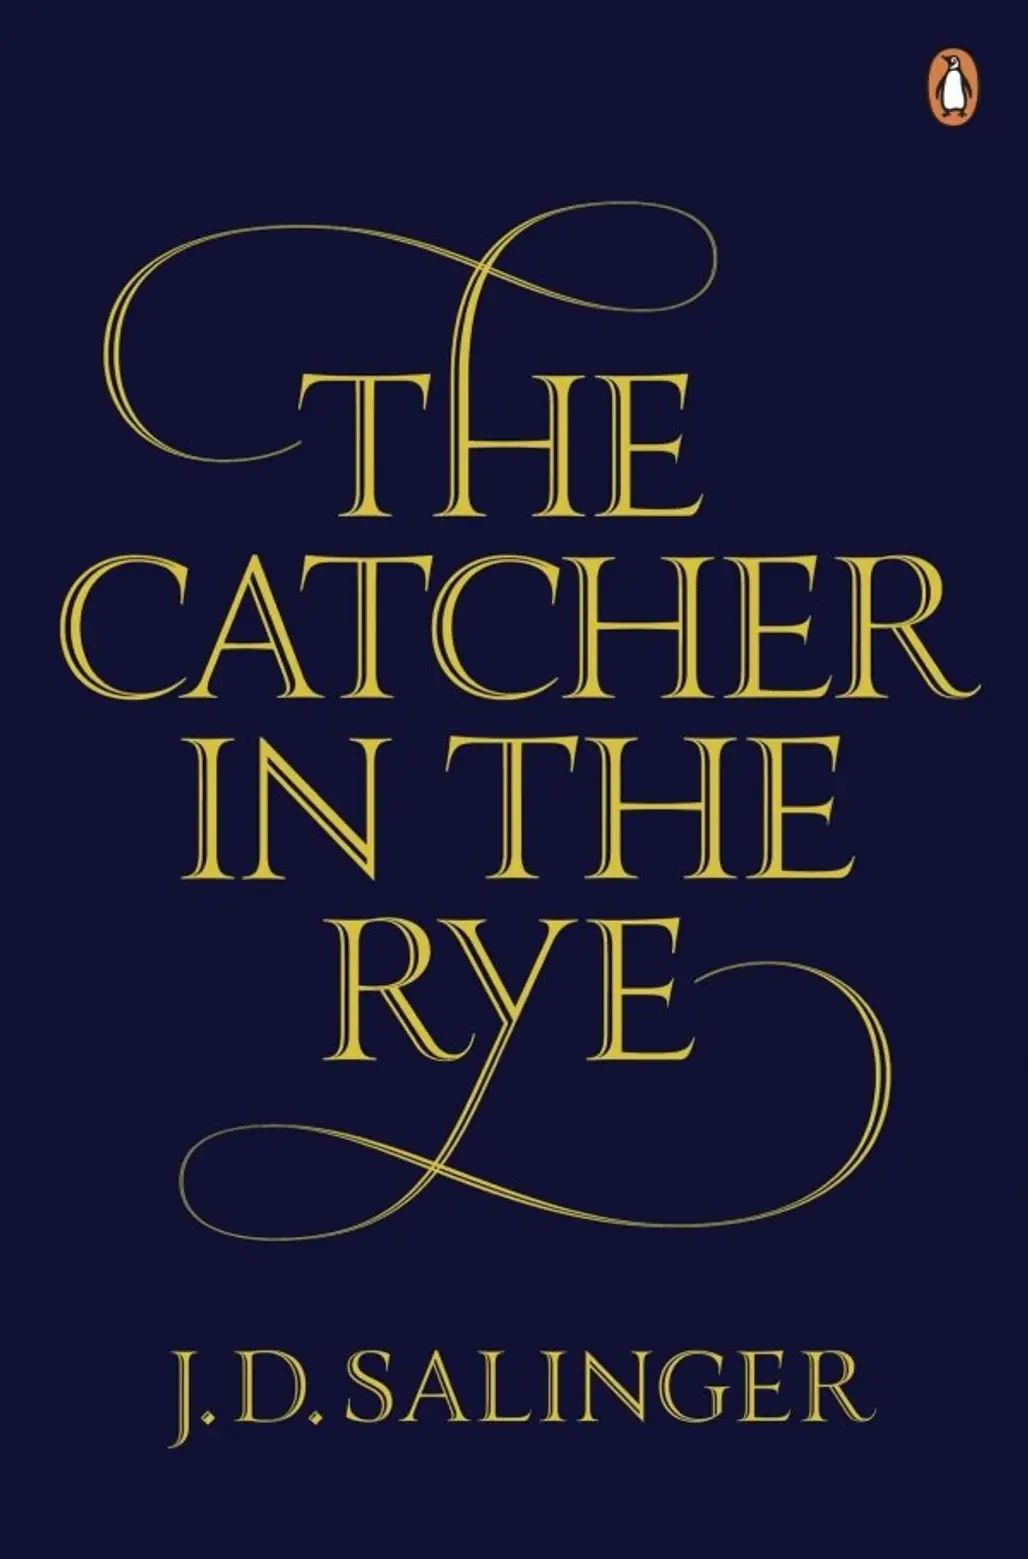 Miley Cyrus - the Catcher in the Rye